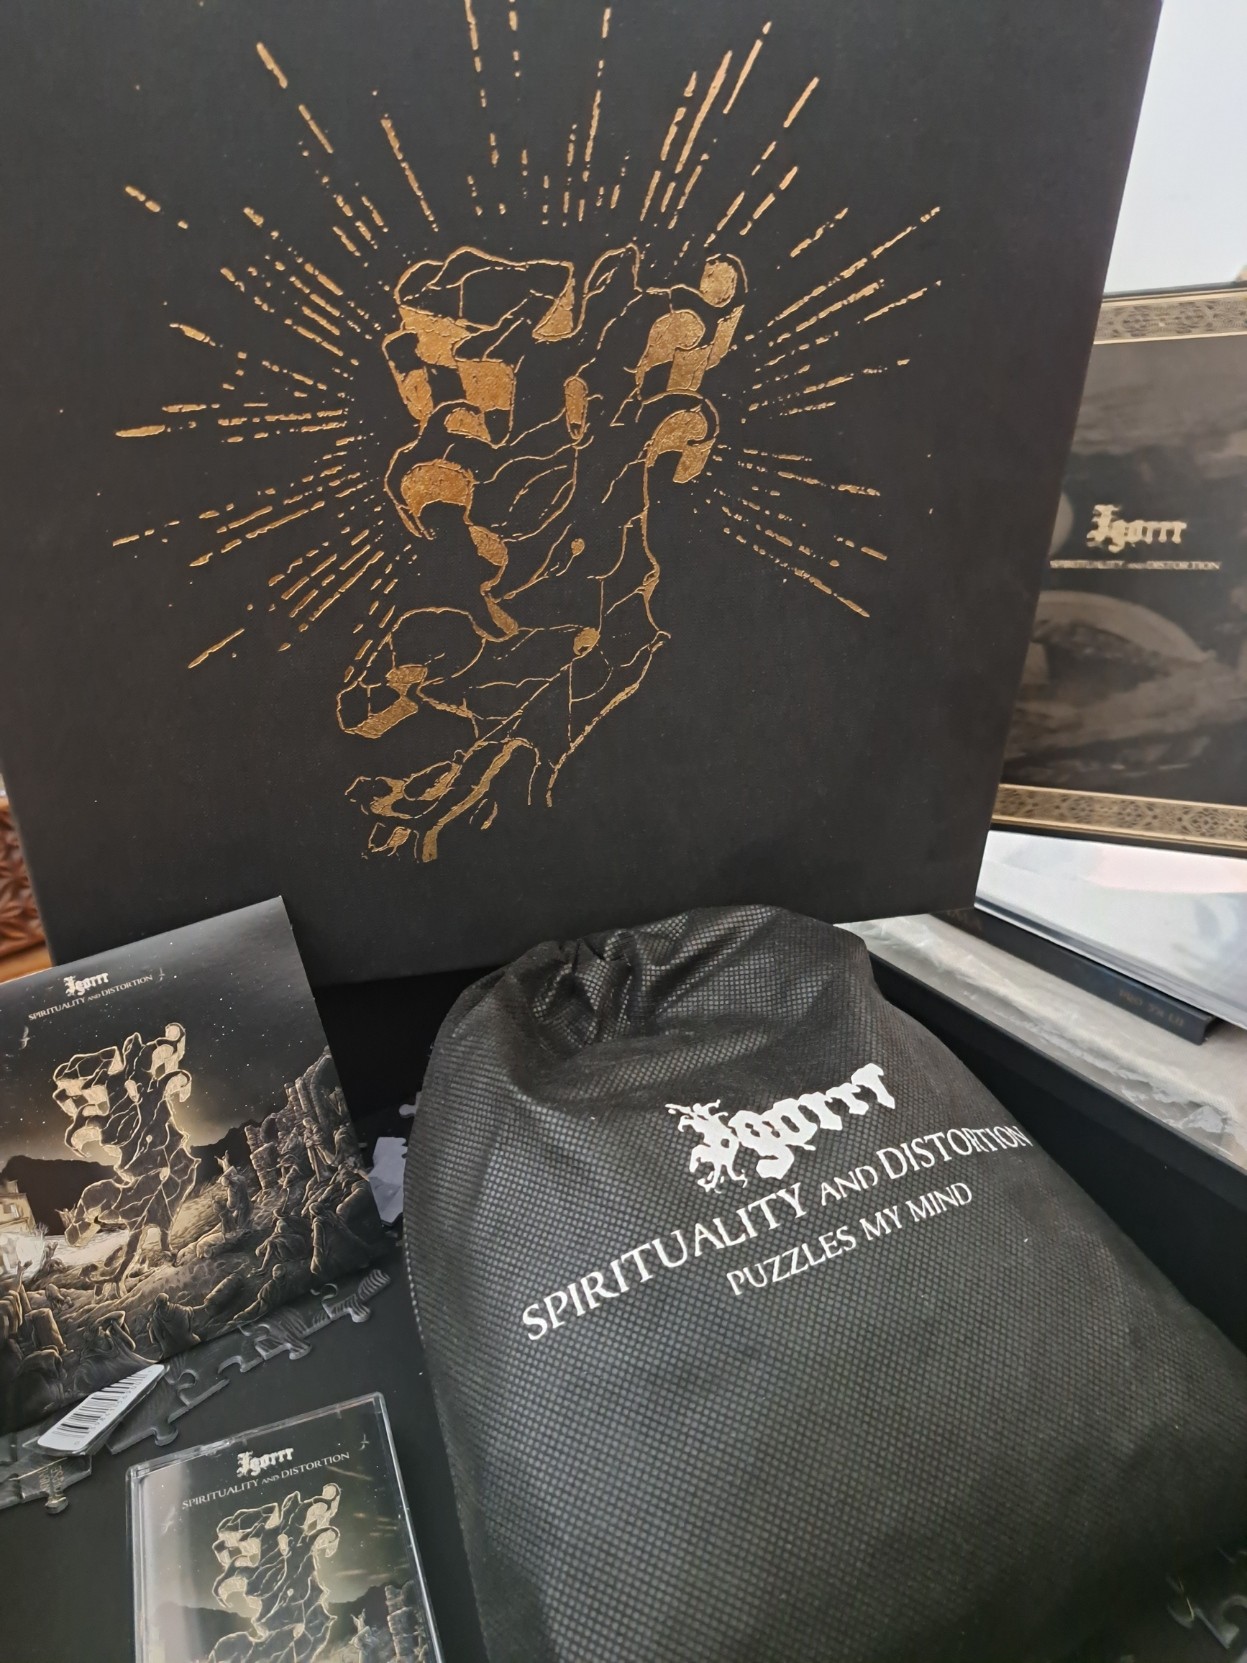 It's a box, a book, a bag, a puzzle A cassette, a CD, a necklace, a double LP  It's Igorrr's Spirituality And Distortion!